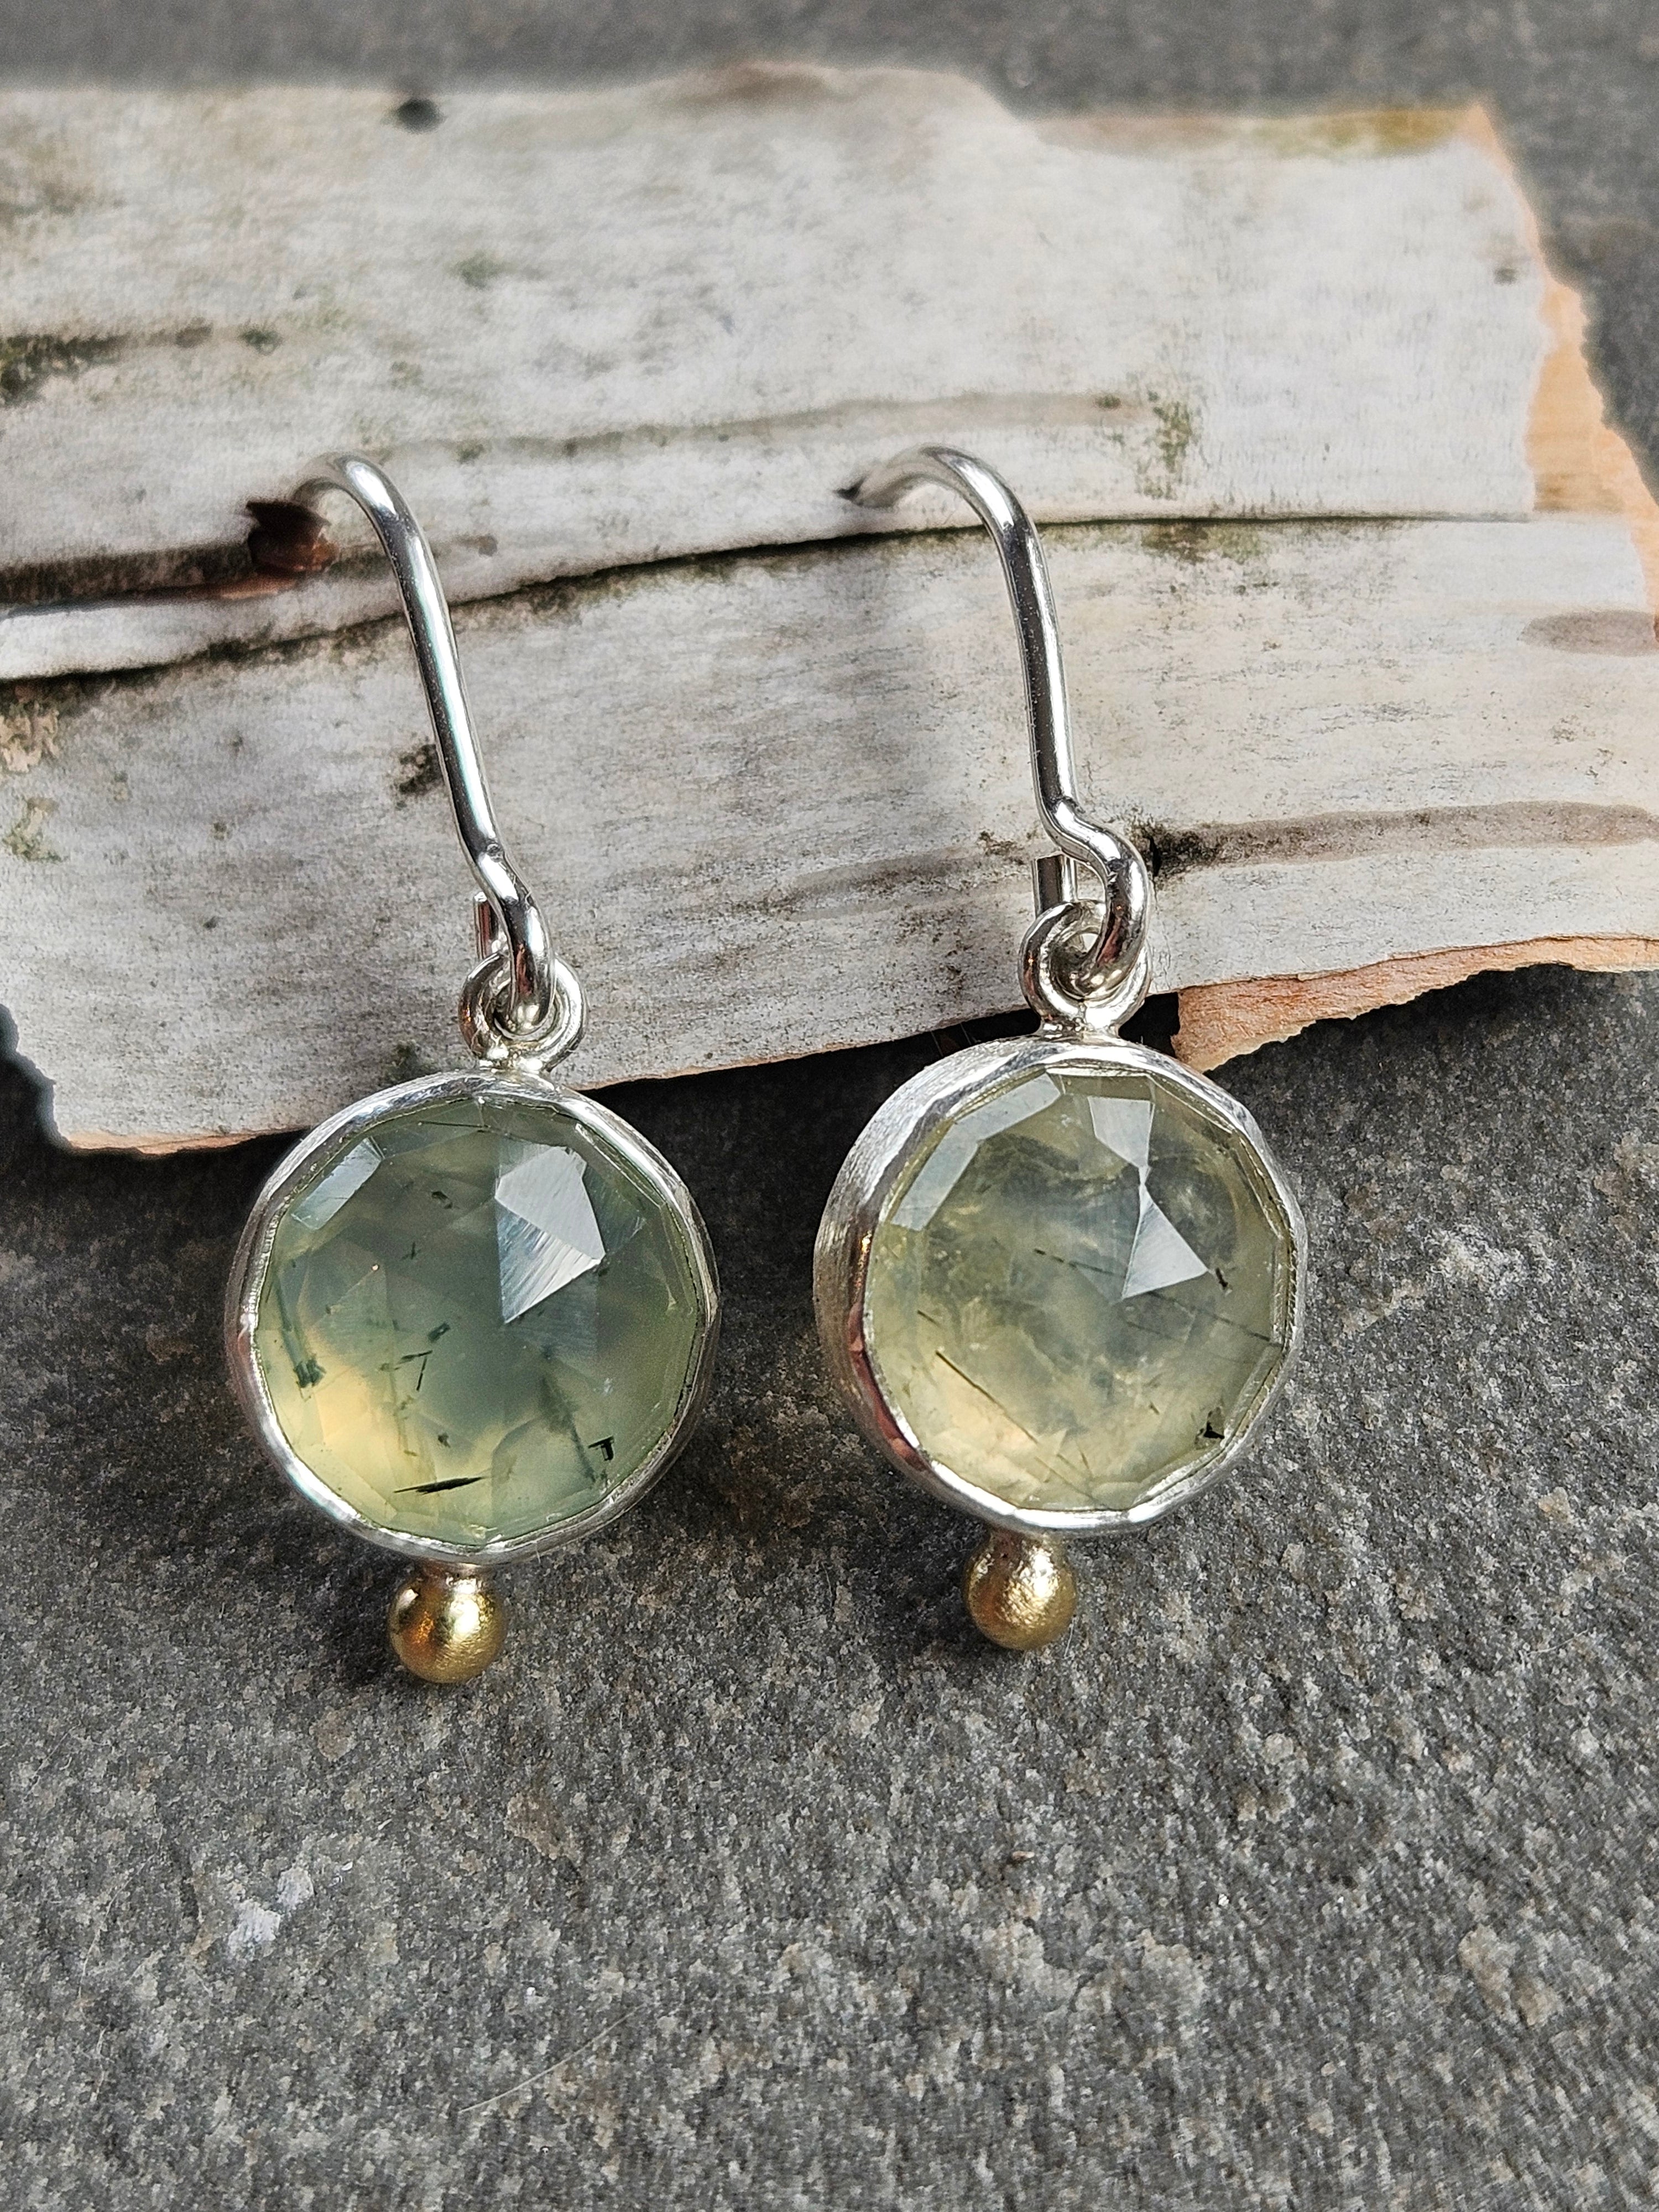 Green Prenite in Sterling silver and 18k gold accent earrings